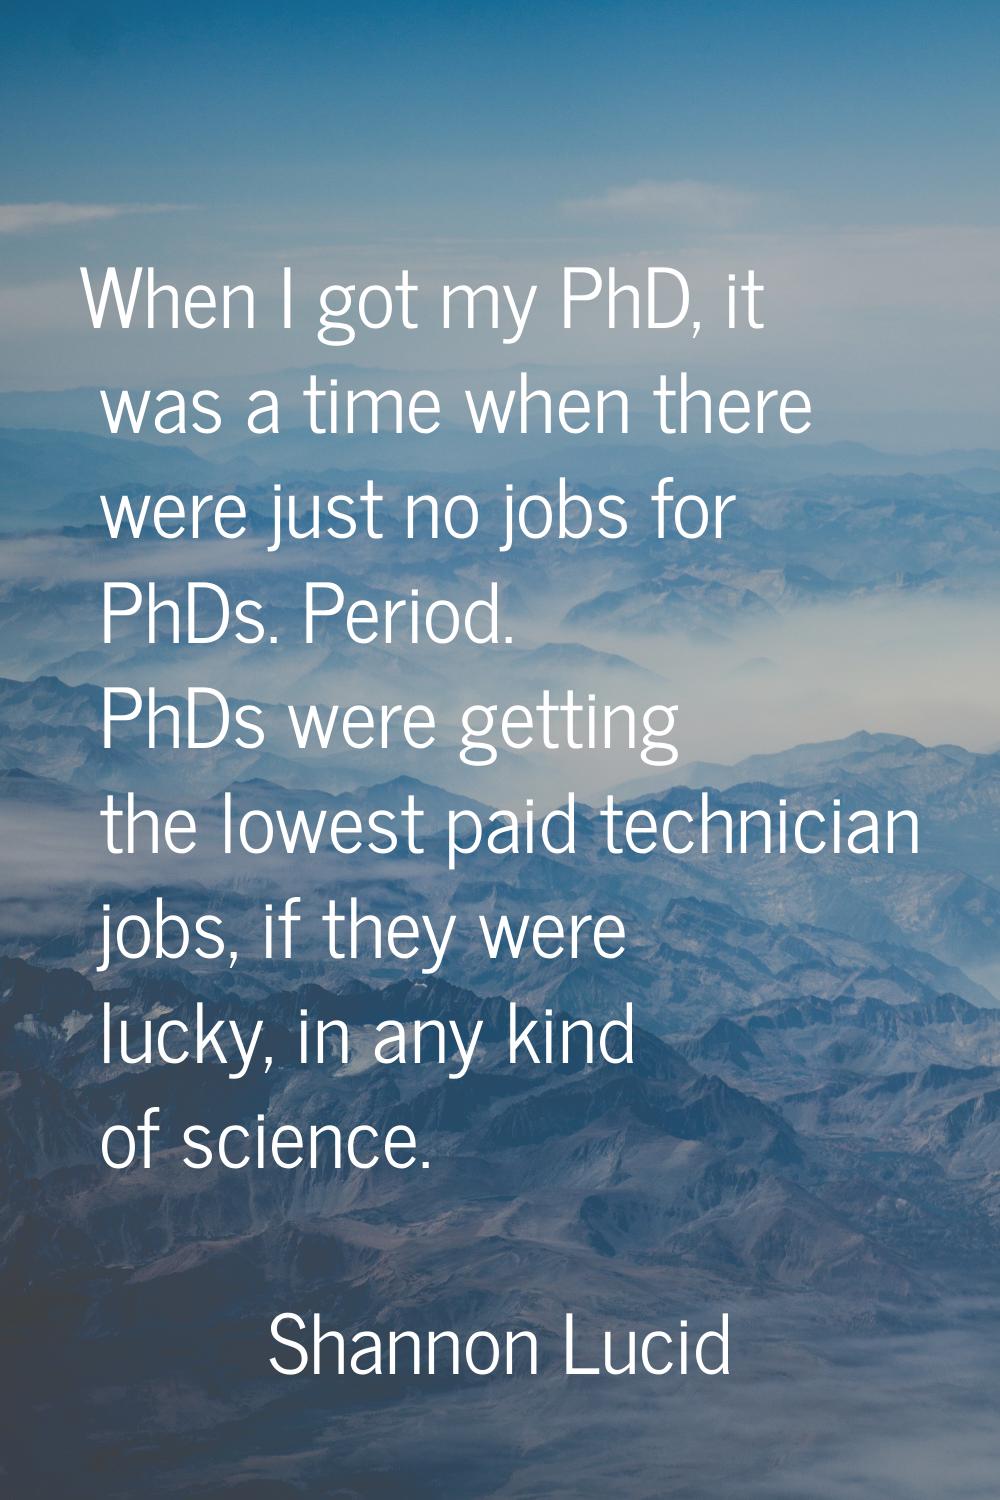 When I got my PhD, it was a time when there were just no jobs for PhDs. Period. PhDs were getting t